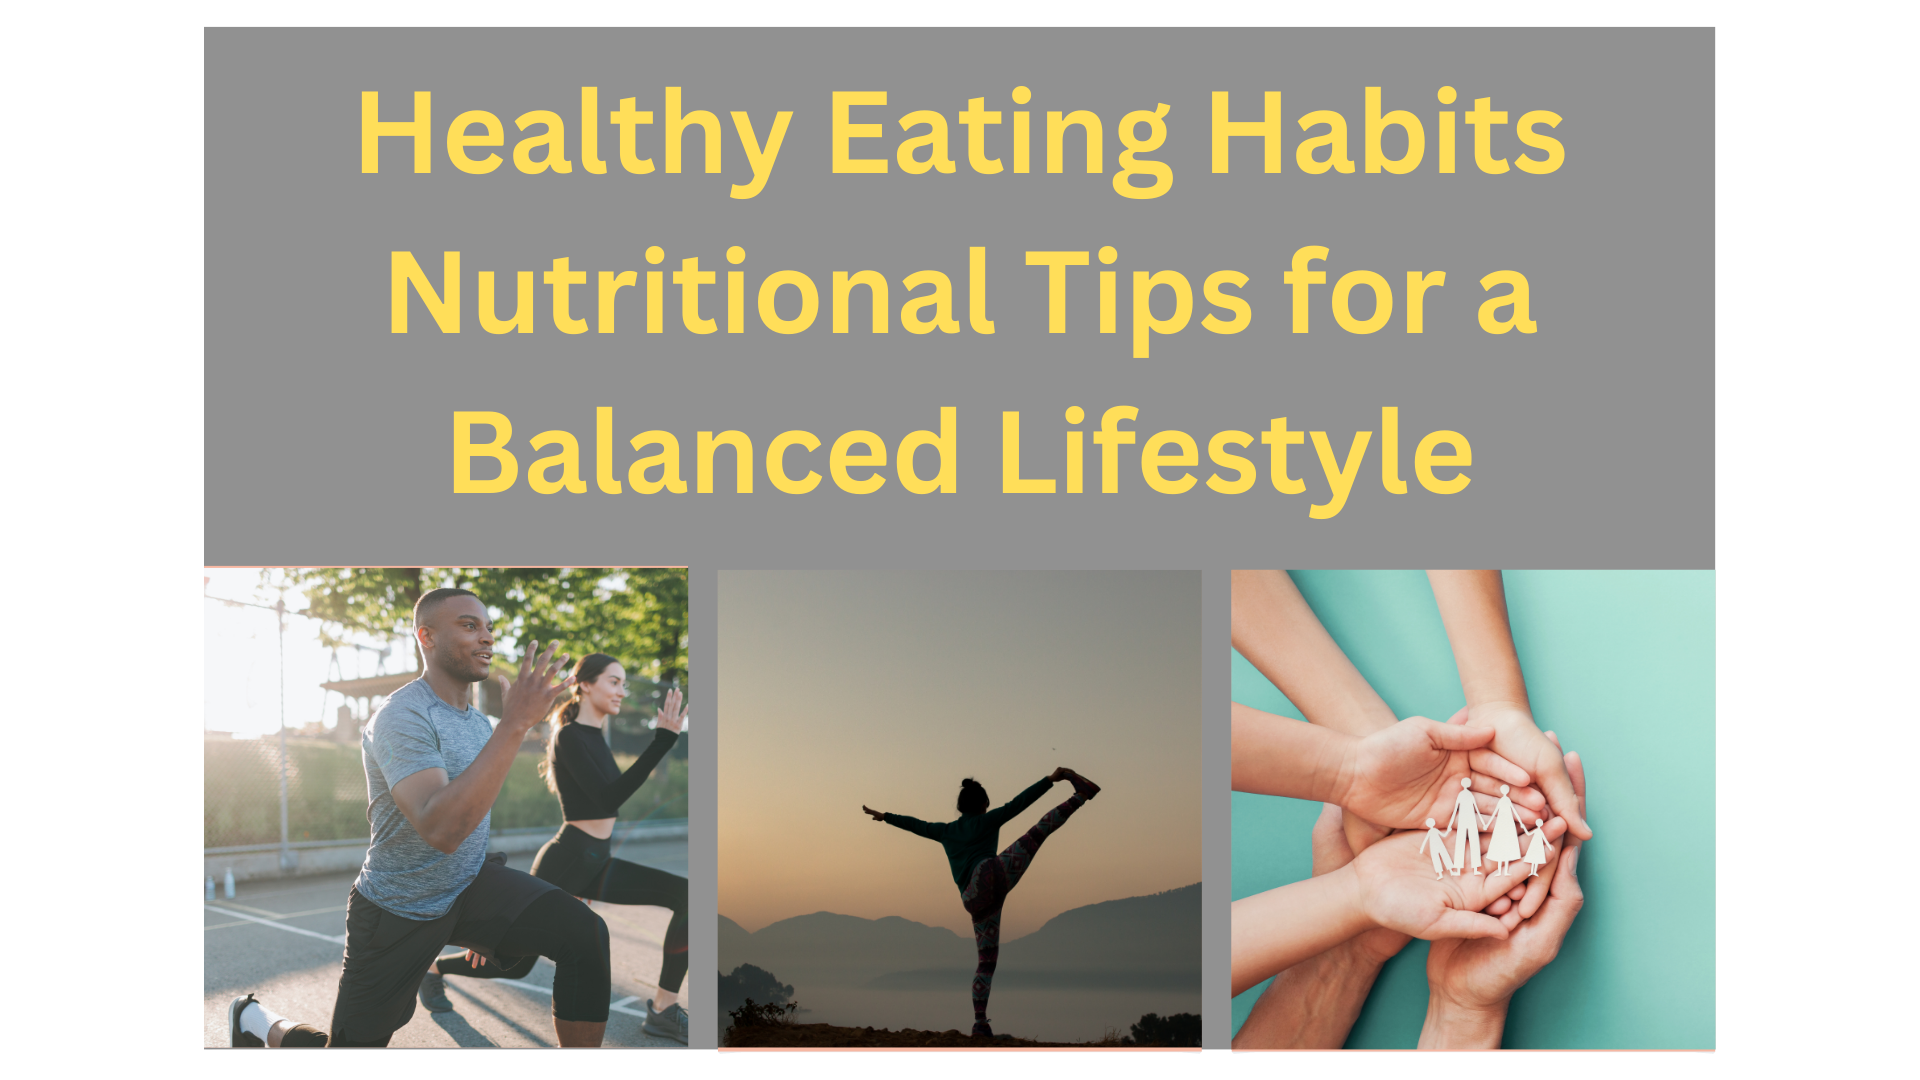 Healthy Eating Habits Nutritional Tips for a Balanced Lifestyle